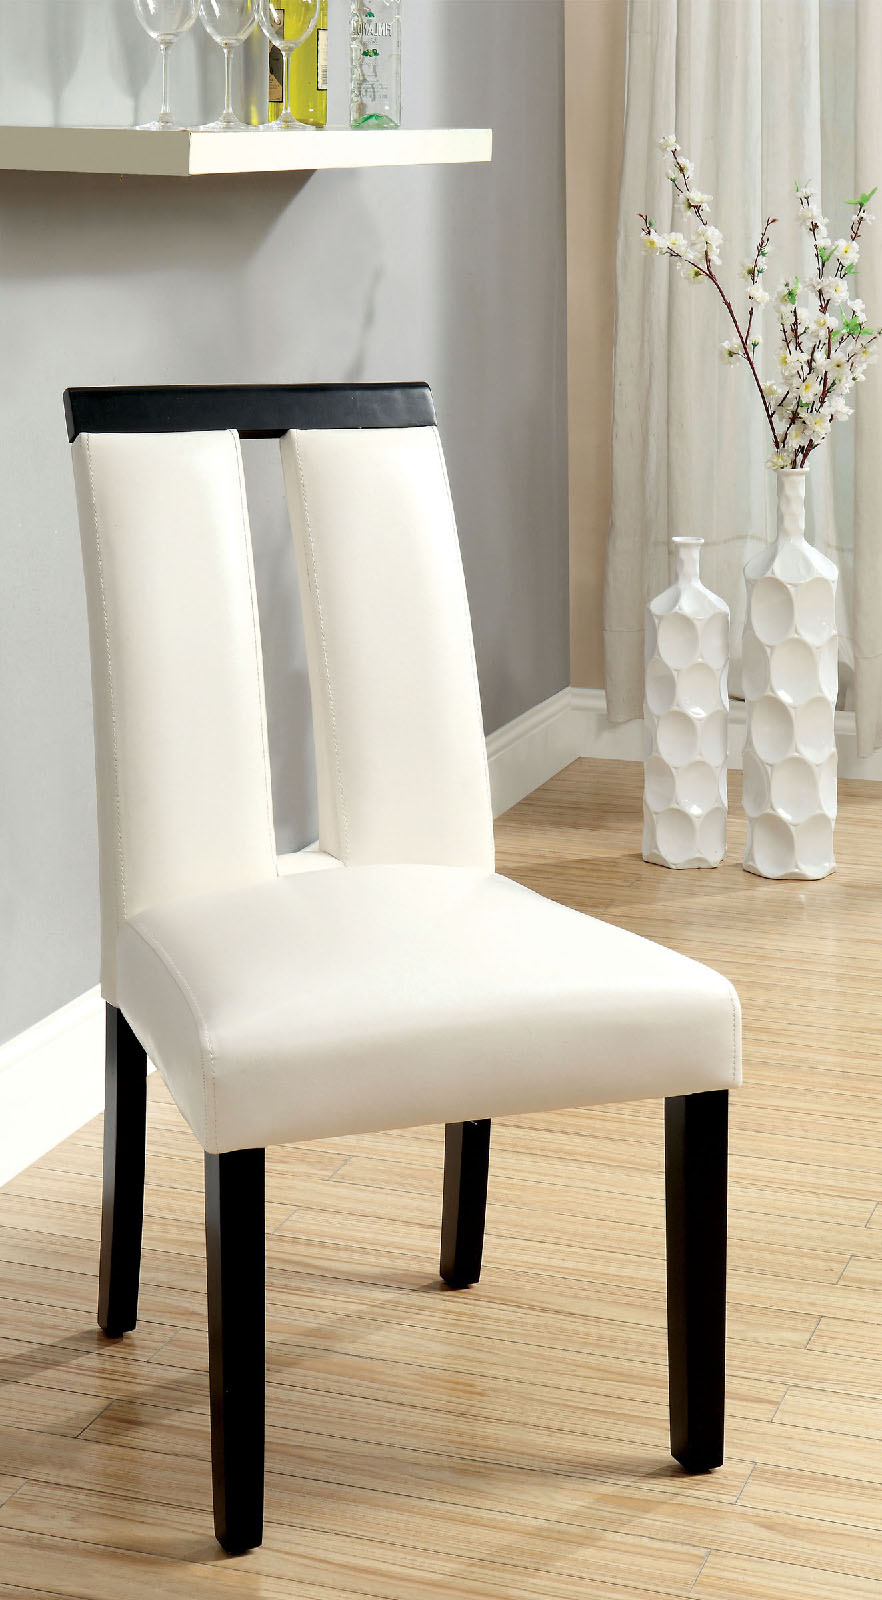 Set of 2 Chairs Black And White Leatherette Beautiful Padded Side Chairs Slit Back Design Kitchen Dining Room Furniture-Boyel Living